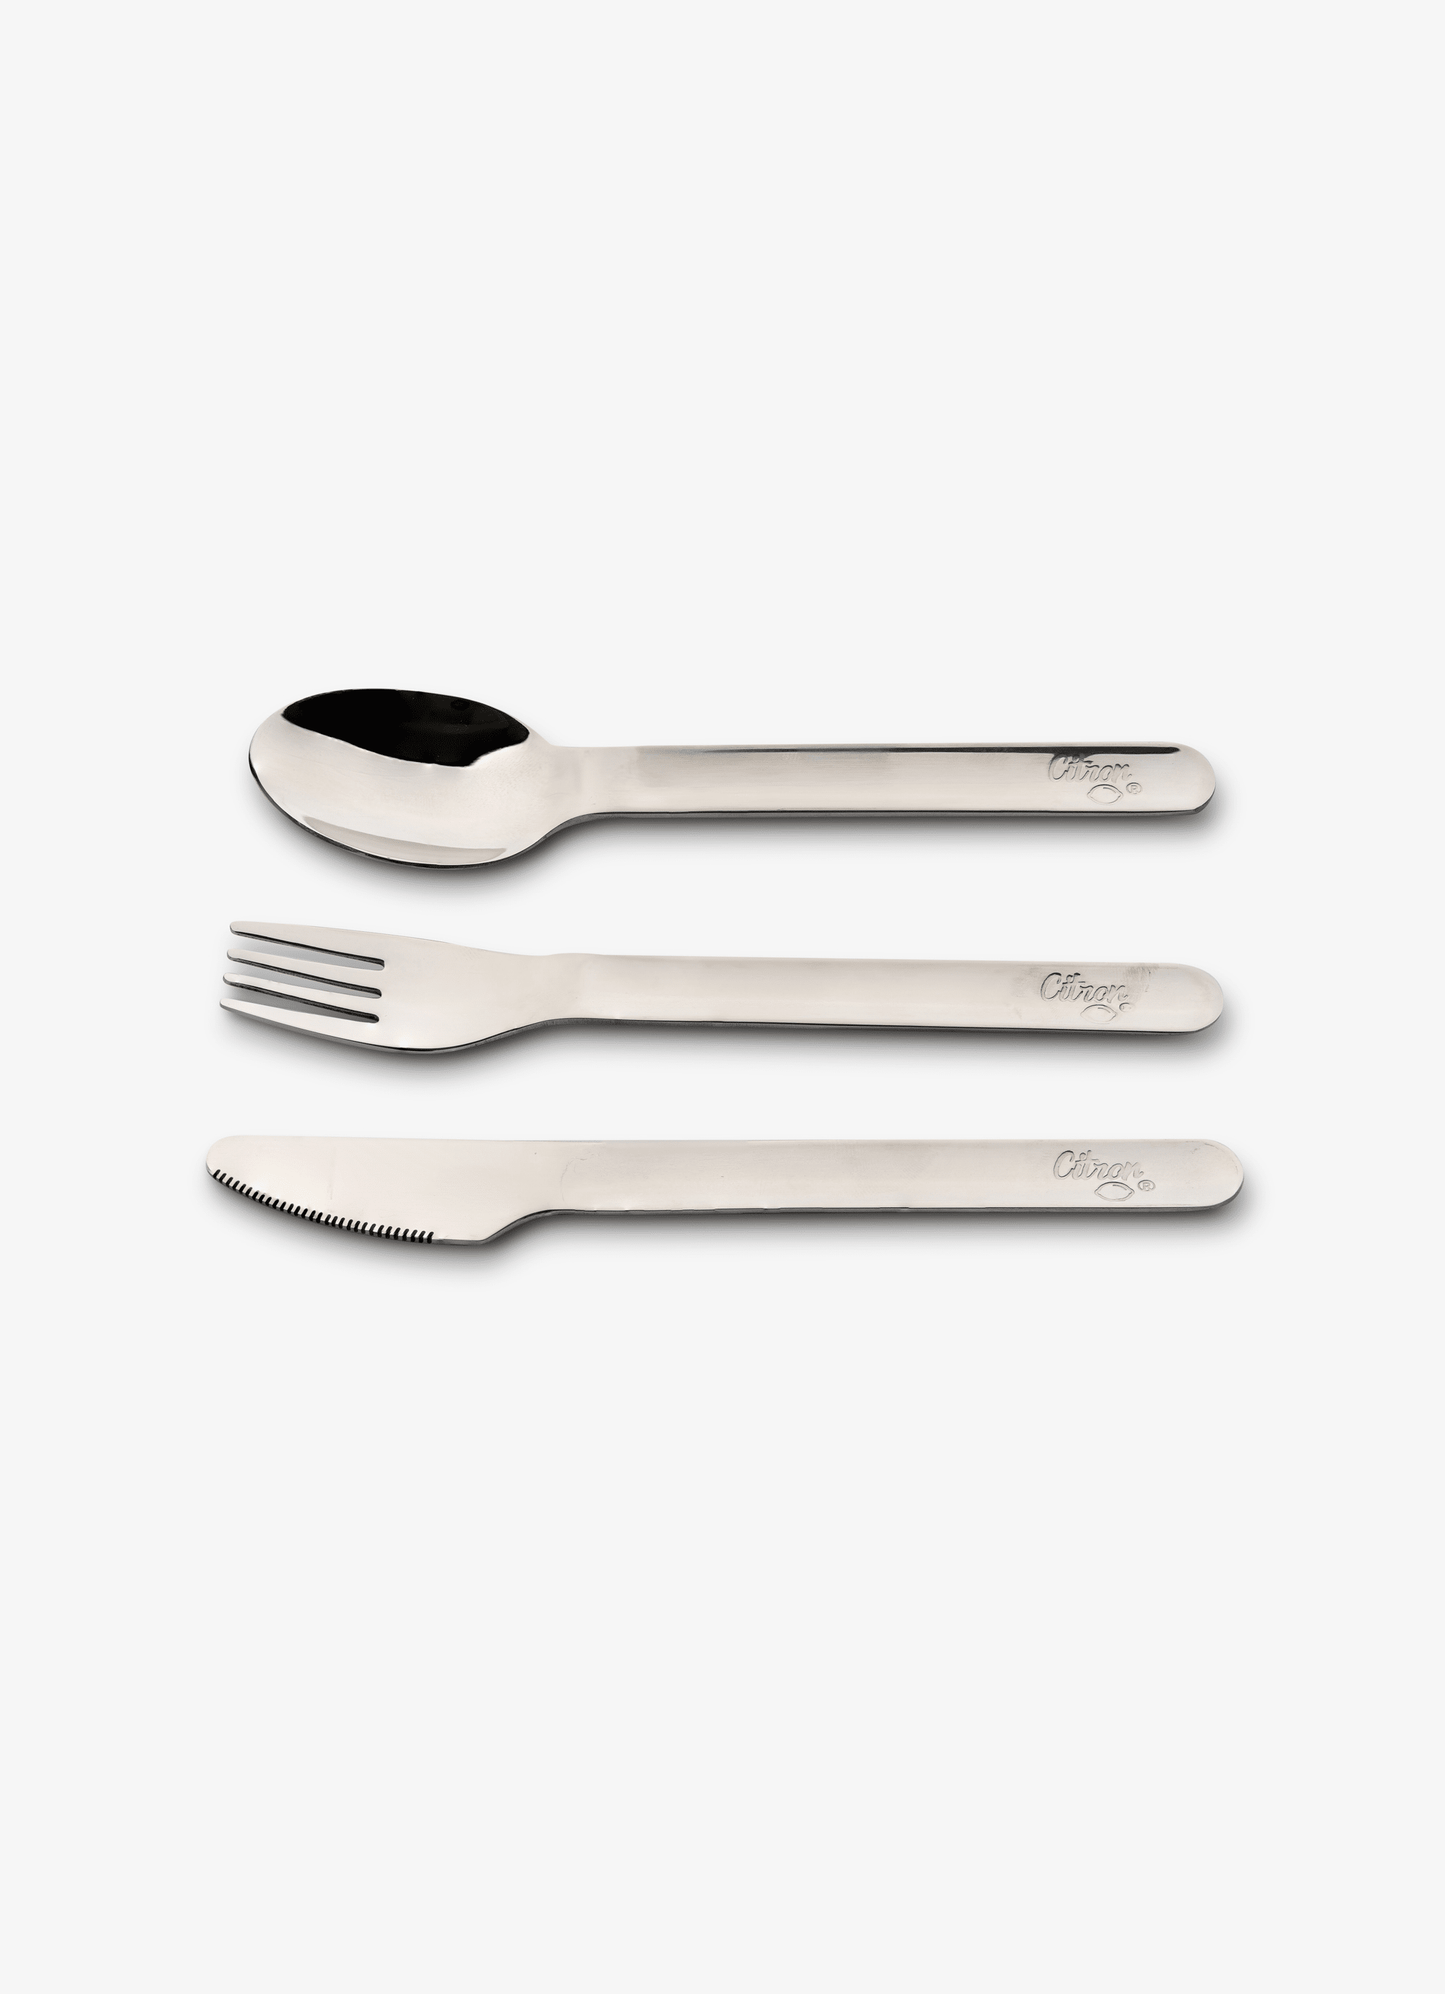 Citron Stainless Steel Cutlery Set with Blush Pink Case - Laadlee